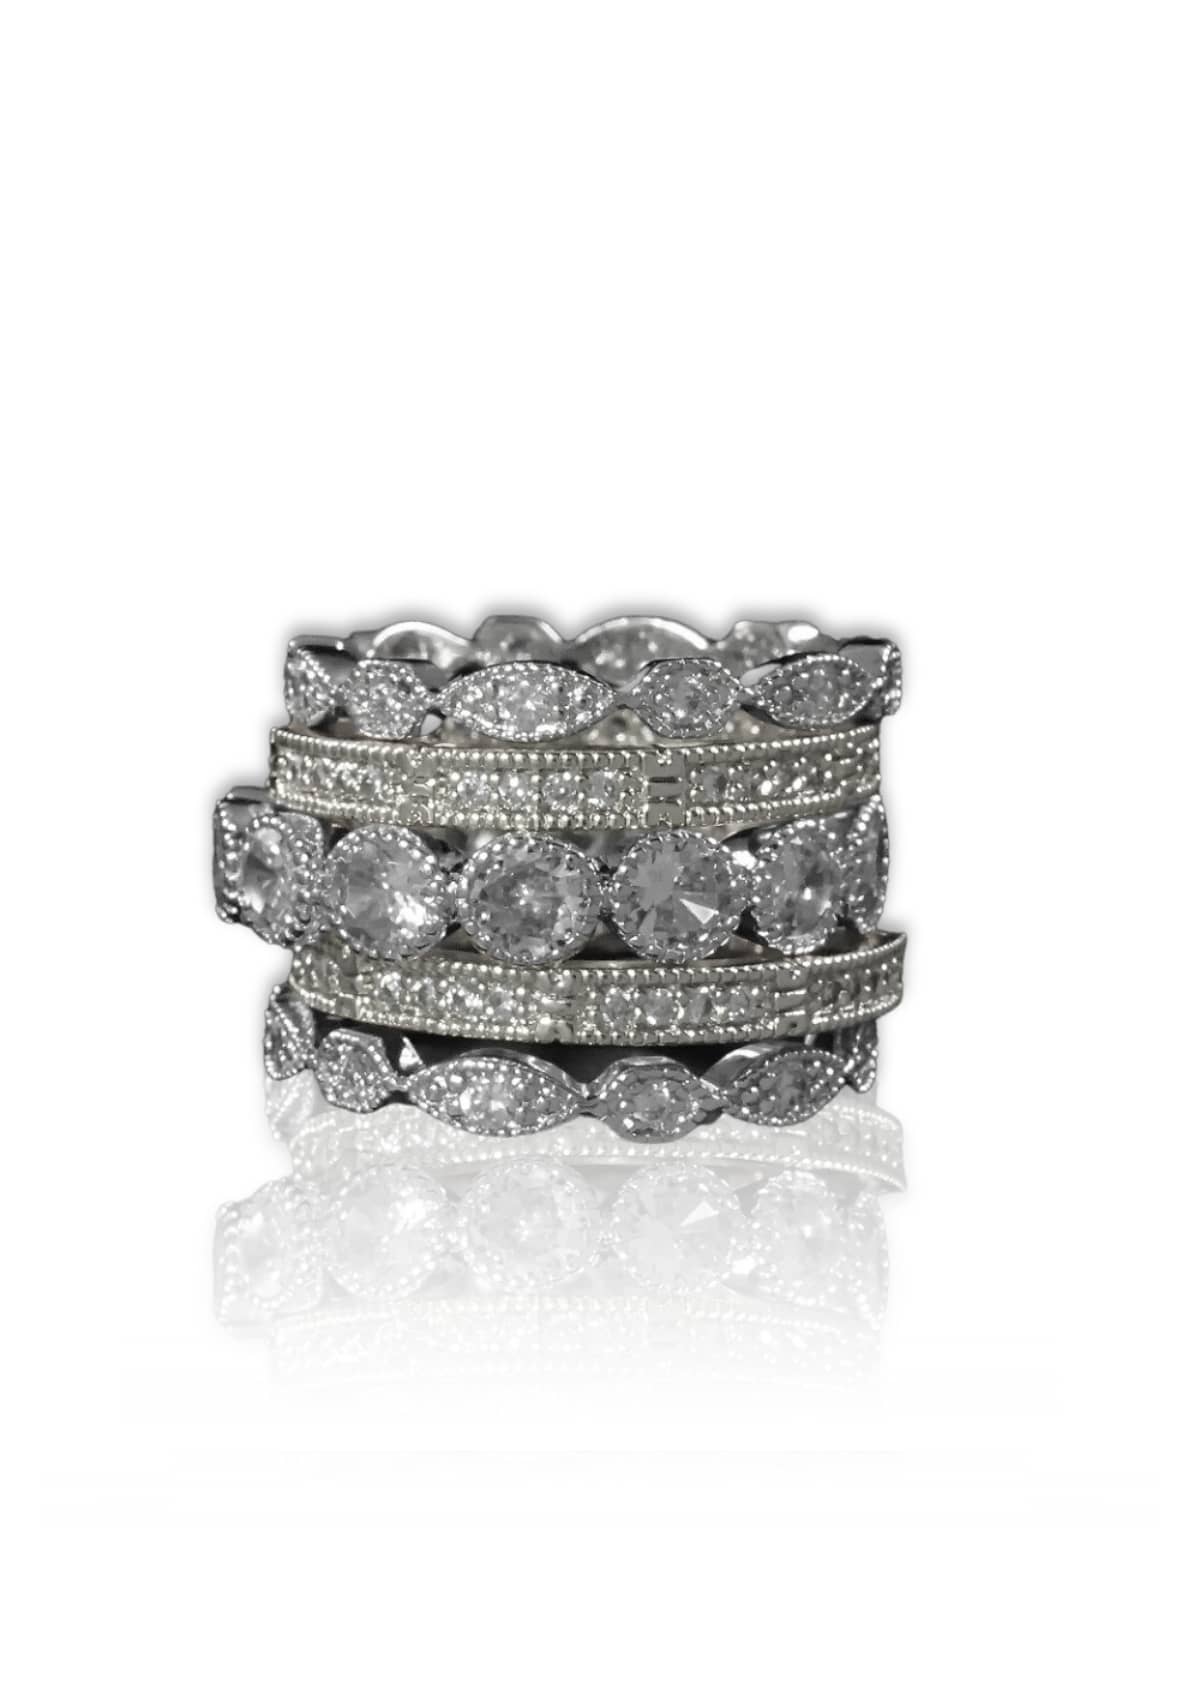 Five Band Stackable with One Large Round CZ Band and 4 Pave Bands -Be-Je Designs- Ruby Jane-